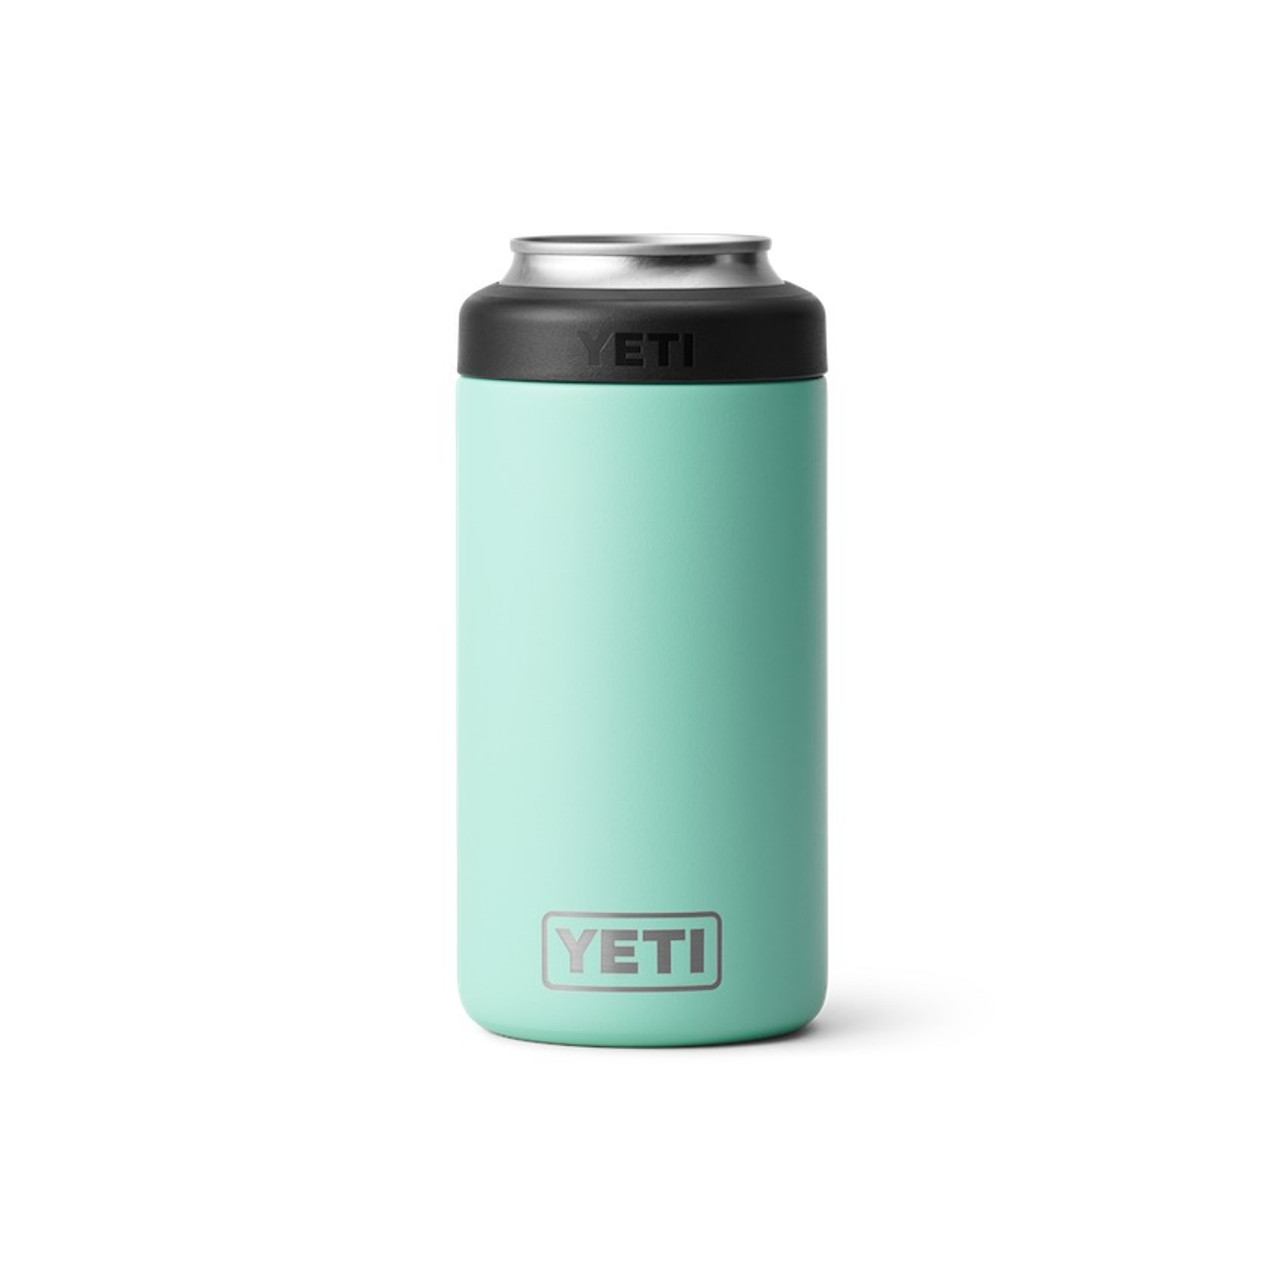 The YETI Rambler Colster: Keeping Your Drinks Cold, Even on the